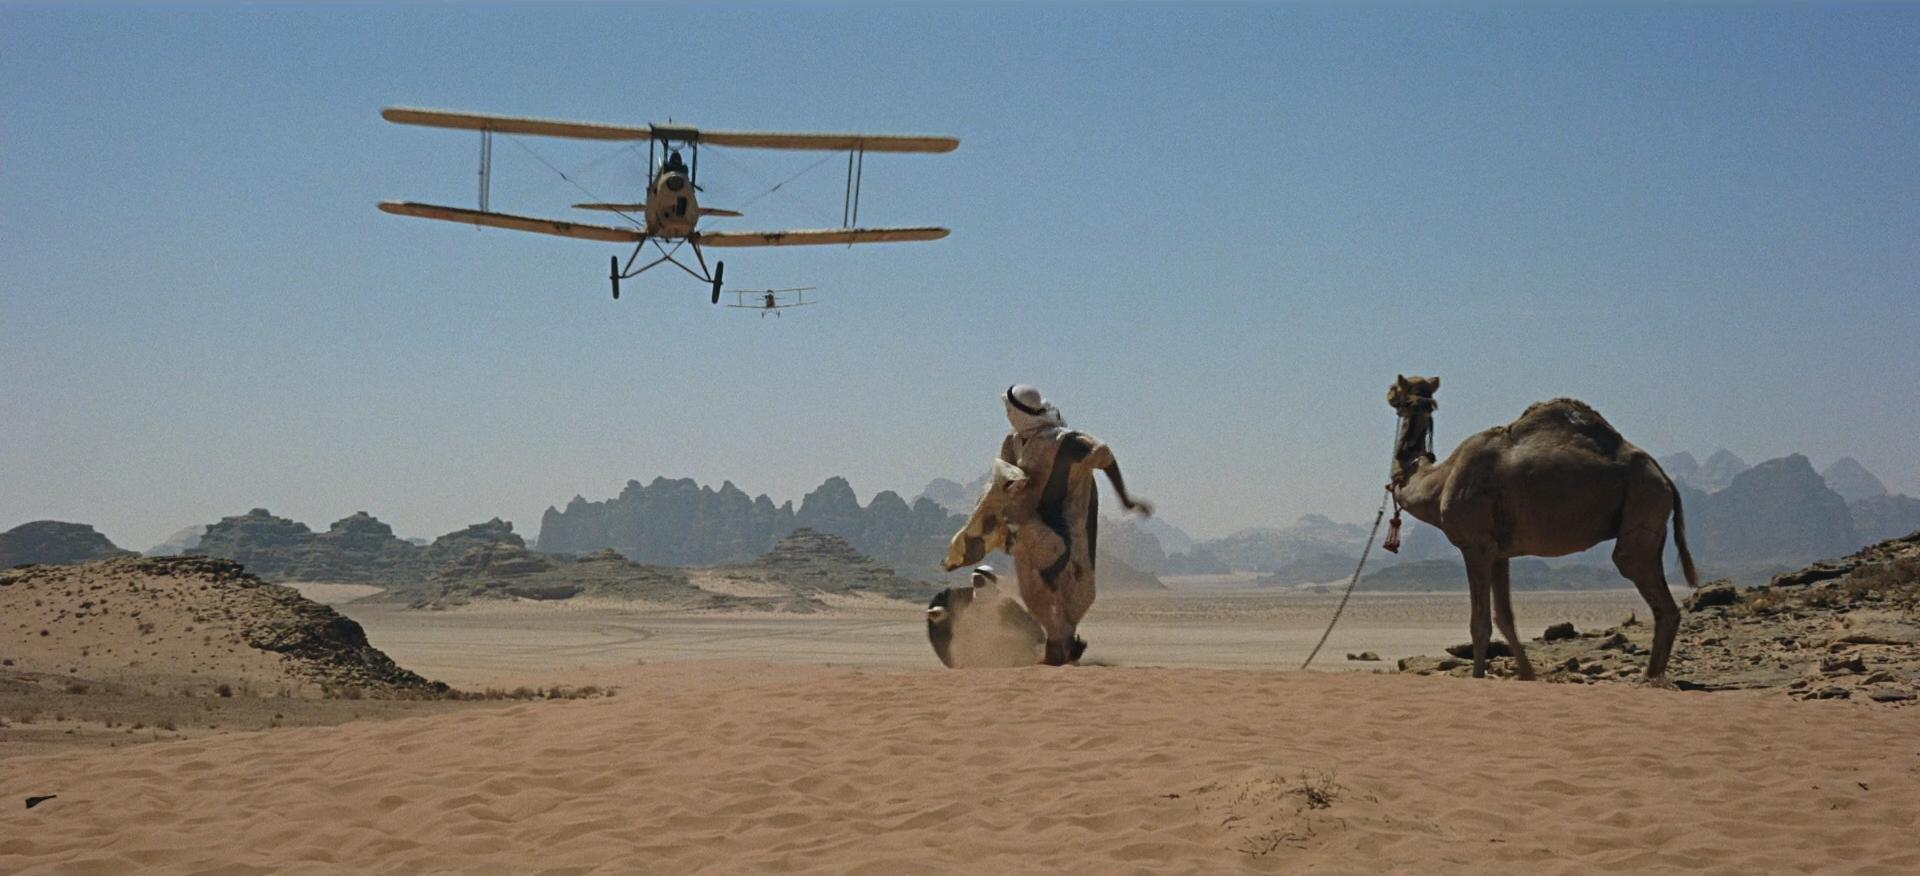 Some of the sweeping scenes of Arabia in the 1962 movie Lawrence of Arabia were actually filmed in Morocco.